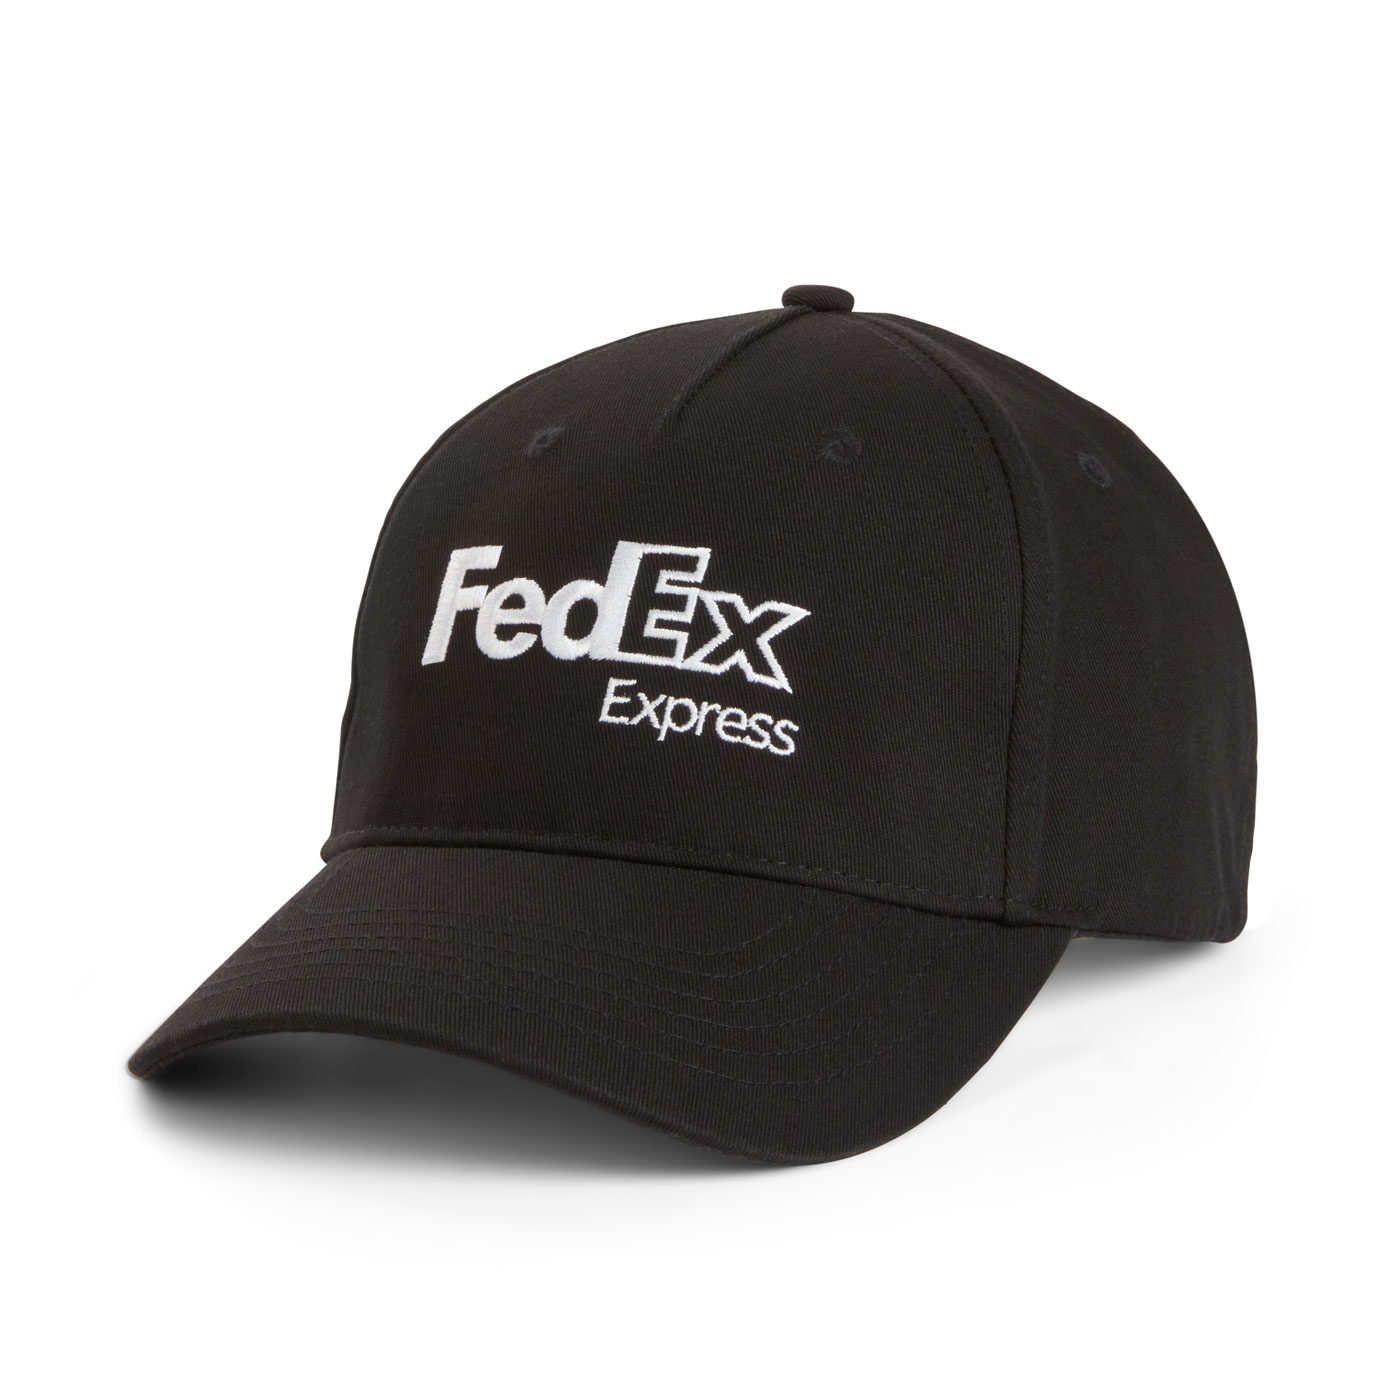 FedEx Express Unstructured Cap | The FedEx Company Store